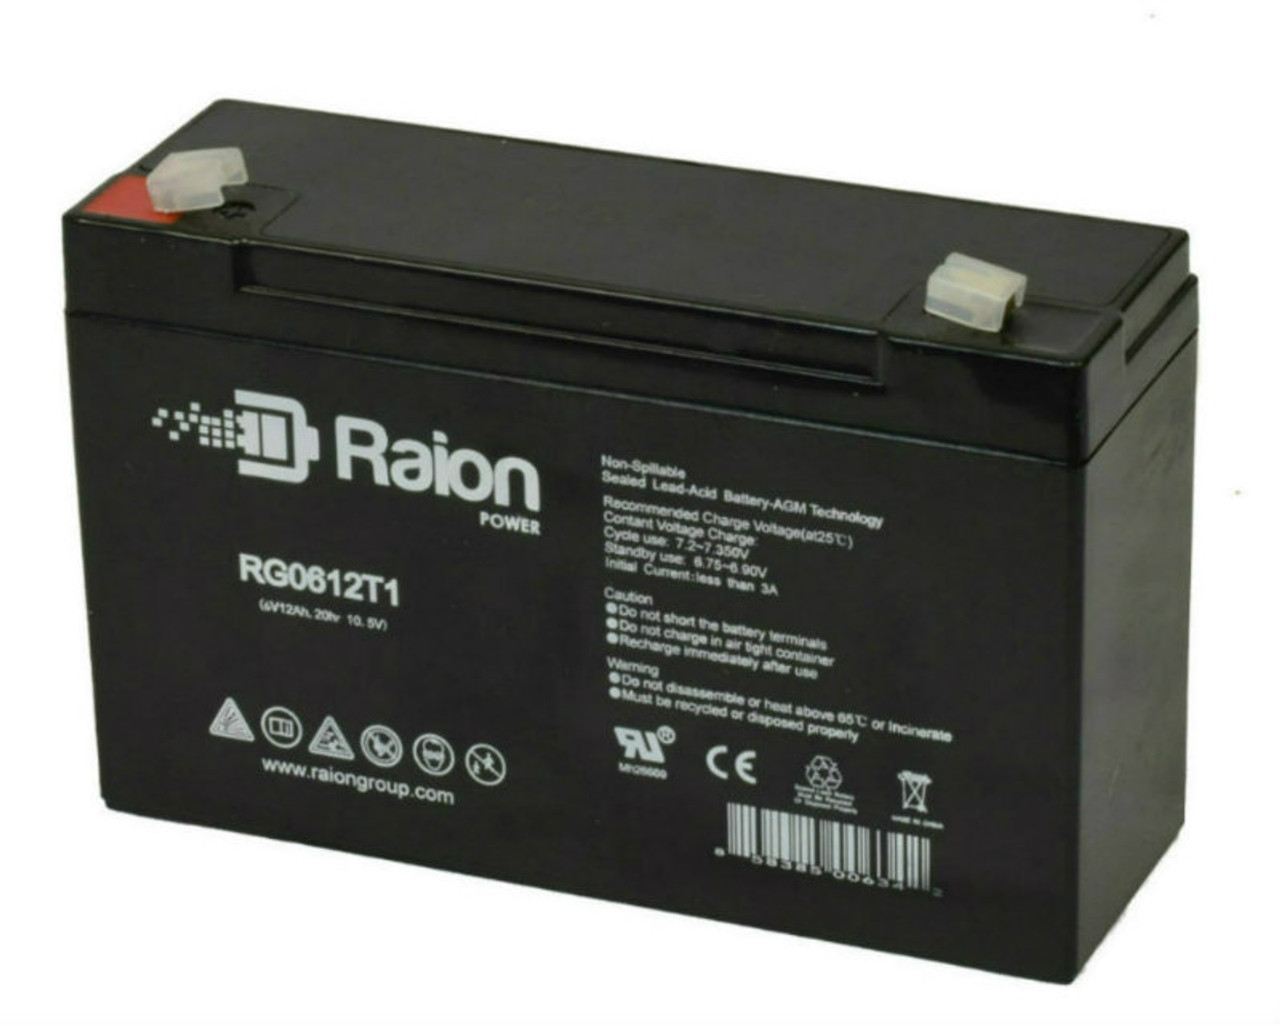 Raion Power RG06120T1 Replacement Battery for Teledyne Big Beam 2SC6G8P2